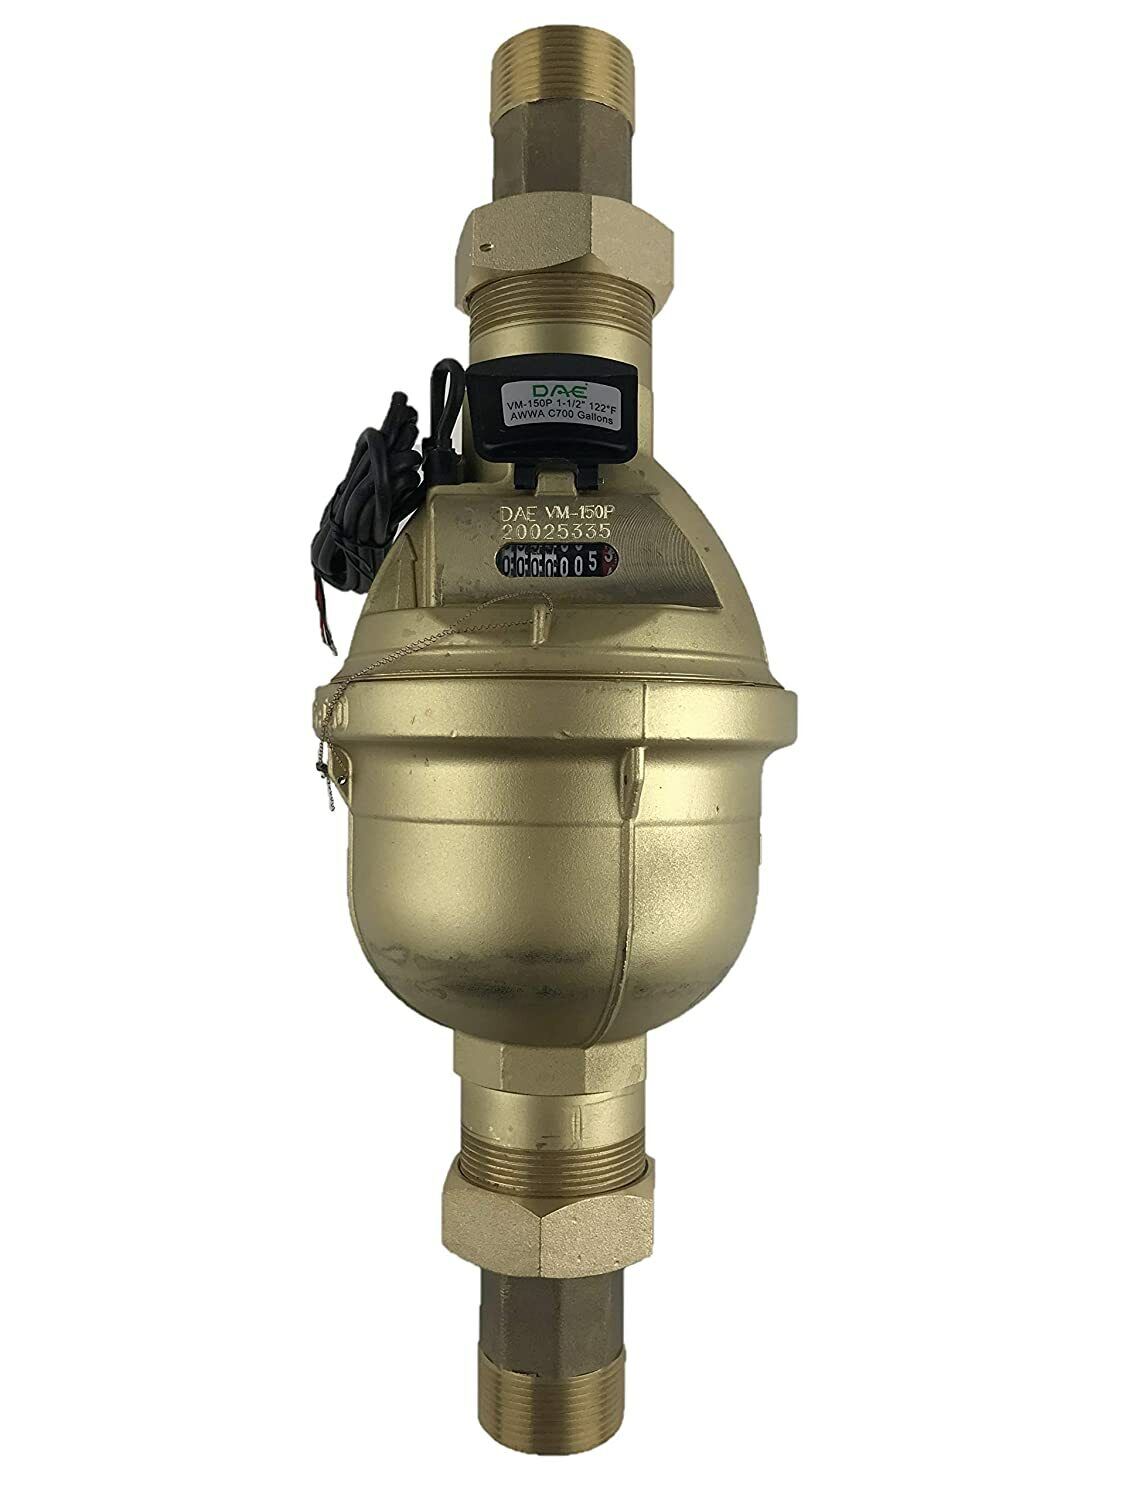 DAE VM-150P 1.5” Positive Displacement Water Meter,Pulse Output,Gallon+Couplings